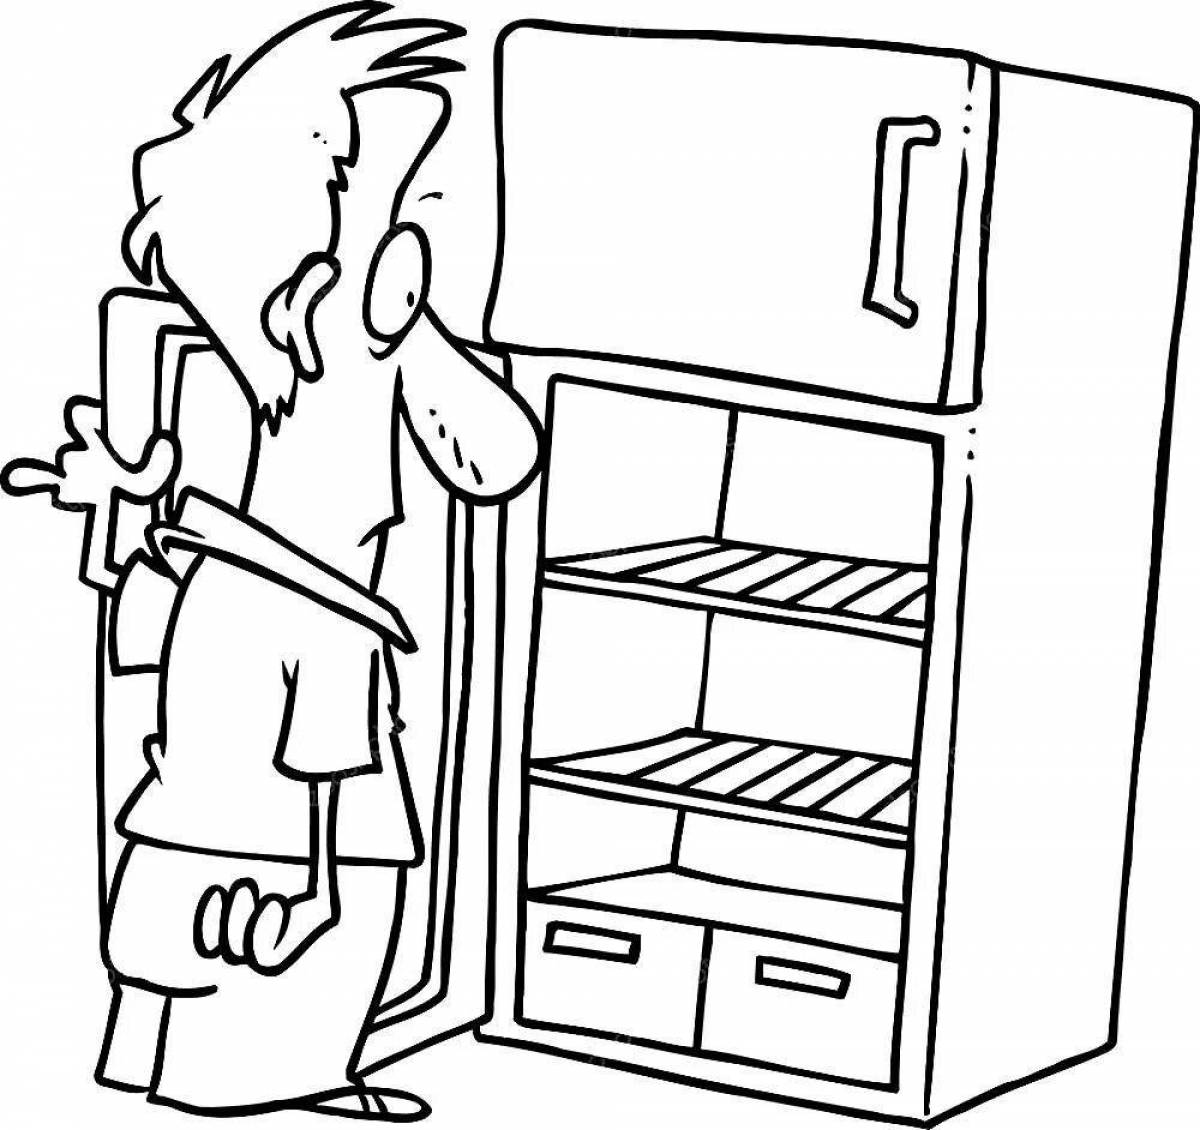 Animated refrigerator open coloring page